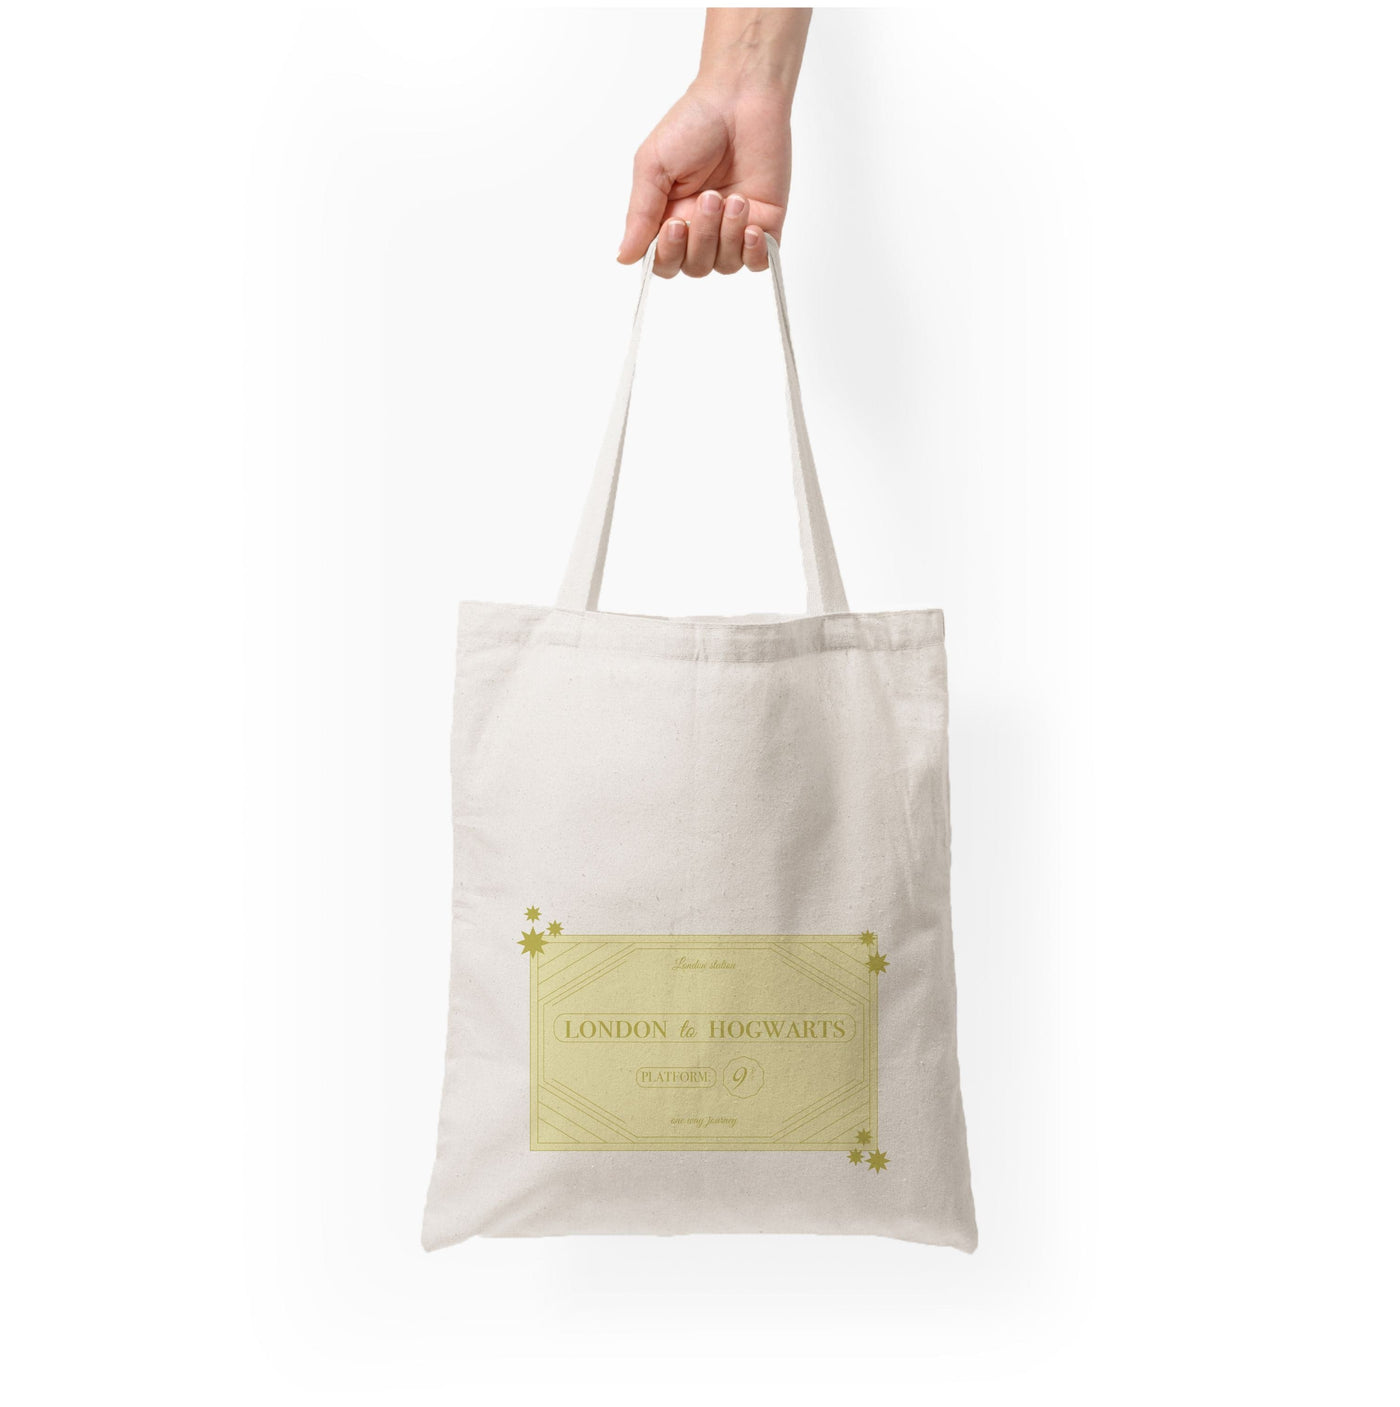 Train Ticket - Harry Potter Tote Bag